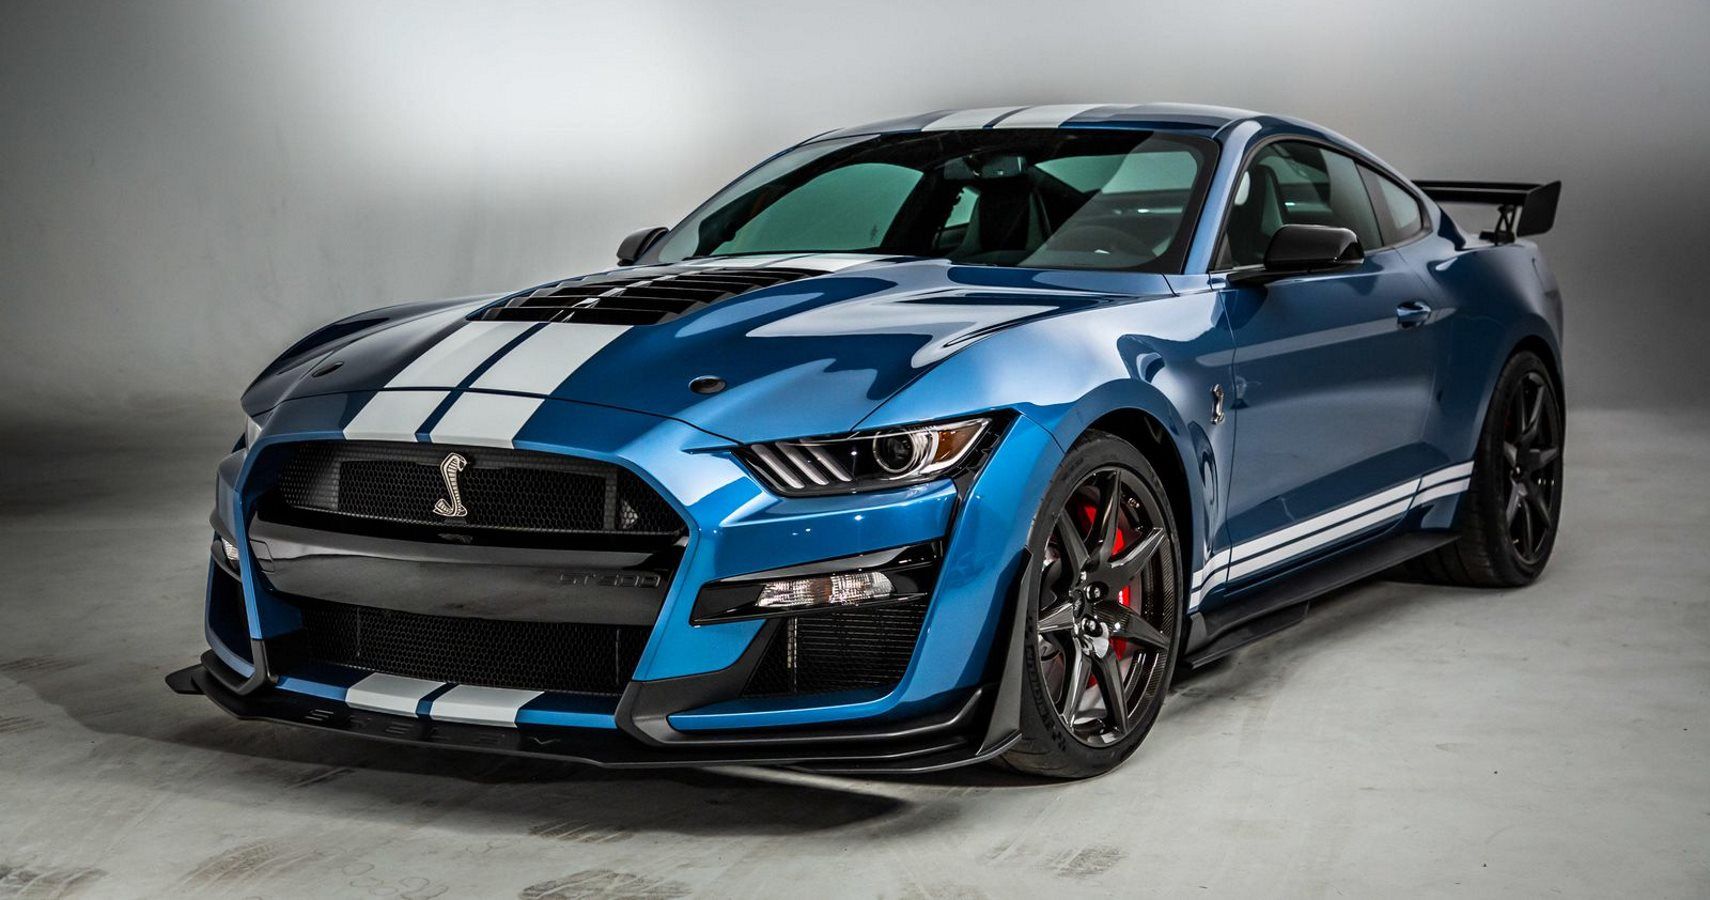 Mustang Shelby Gt500 Preis